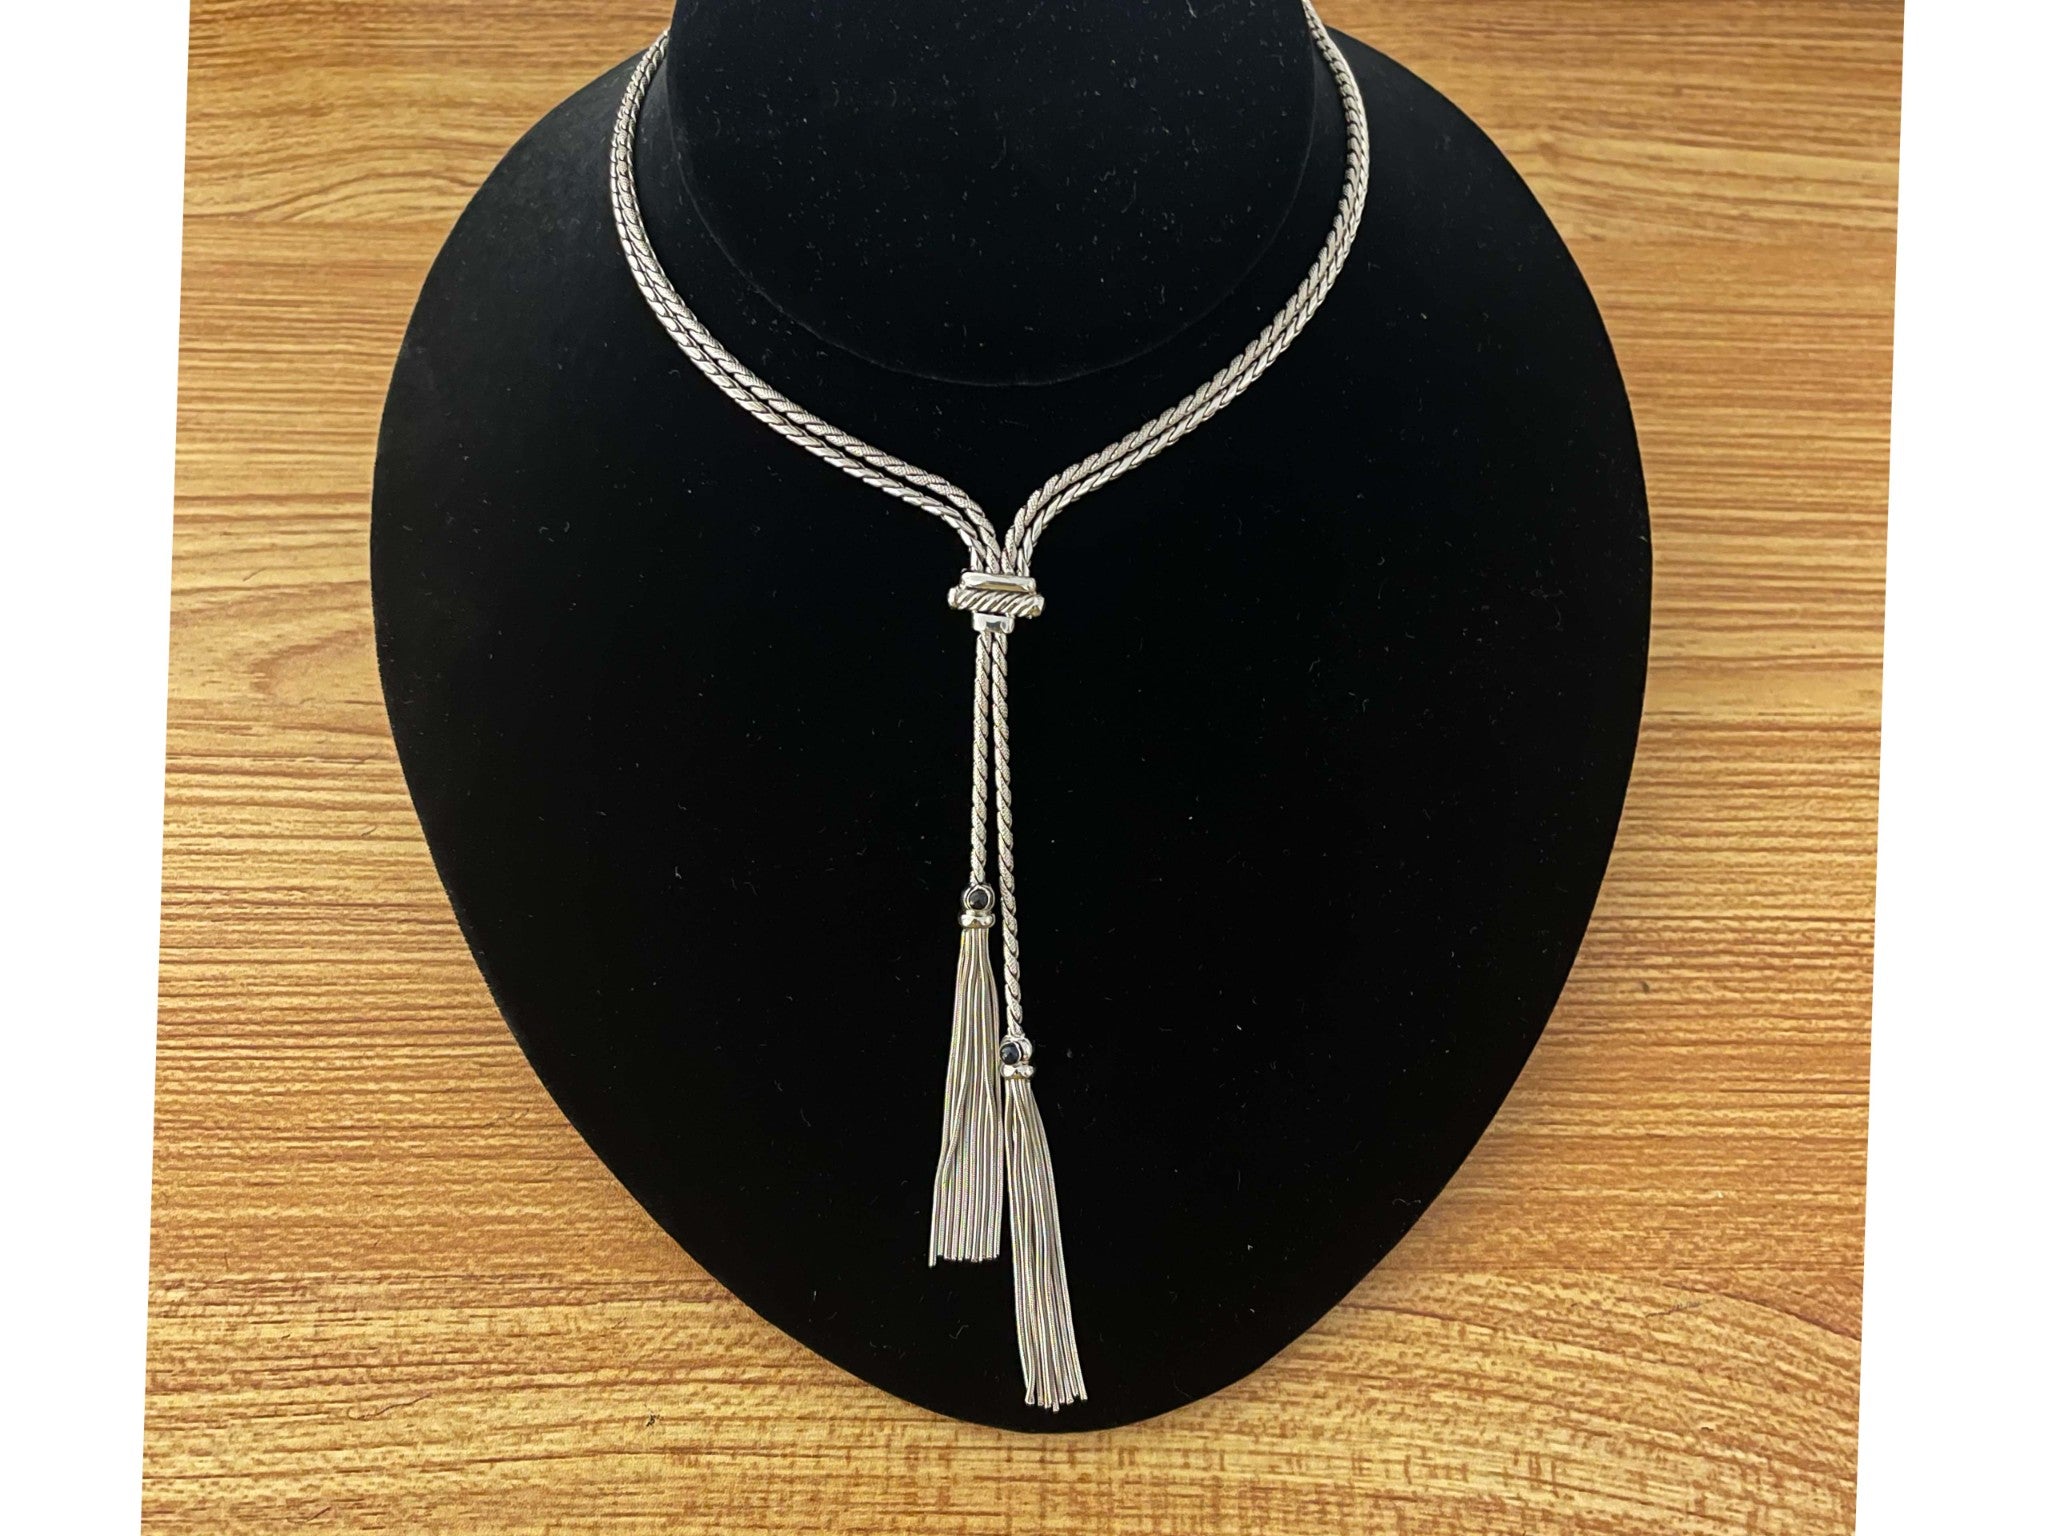 Lariette Tassle Necklace with Blue Sapphires in 14k White Gold